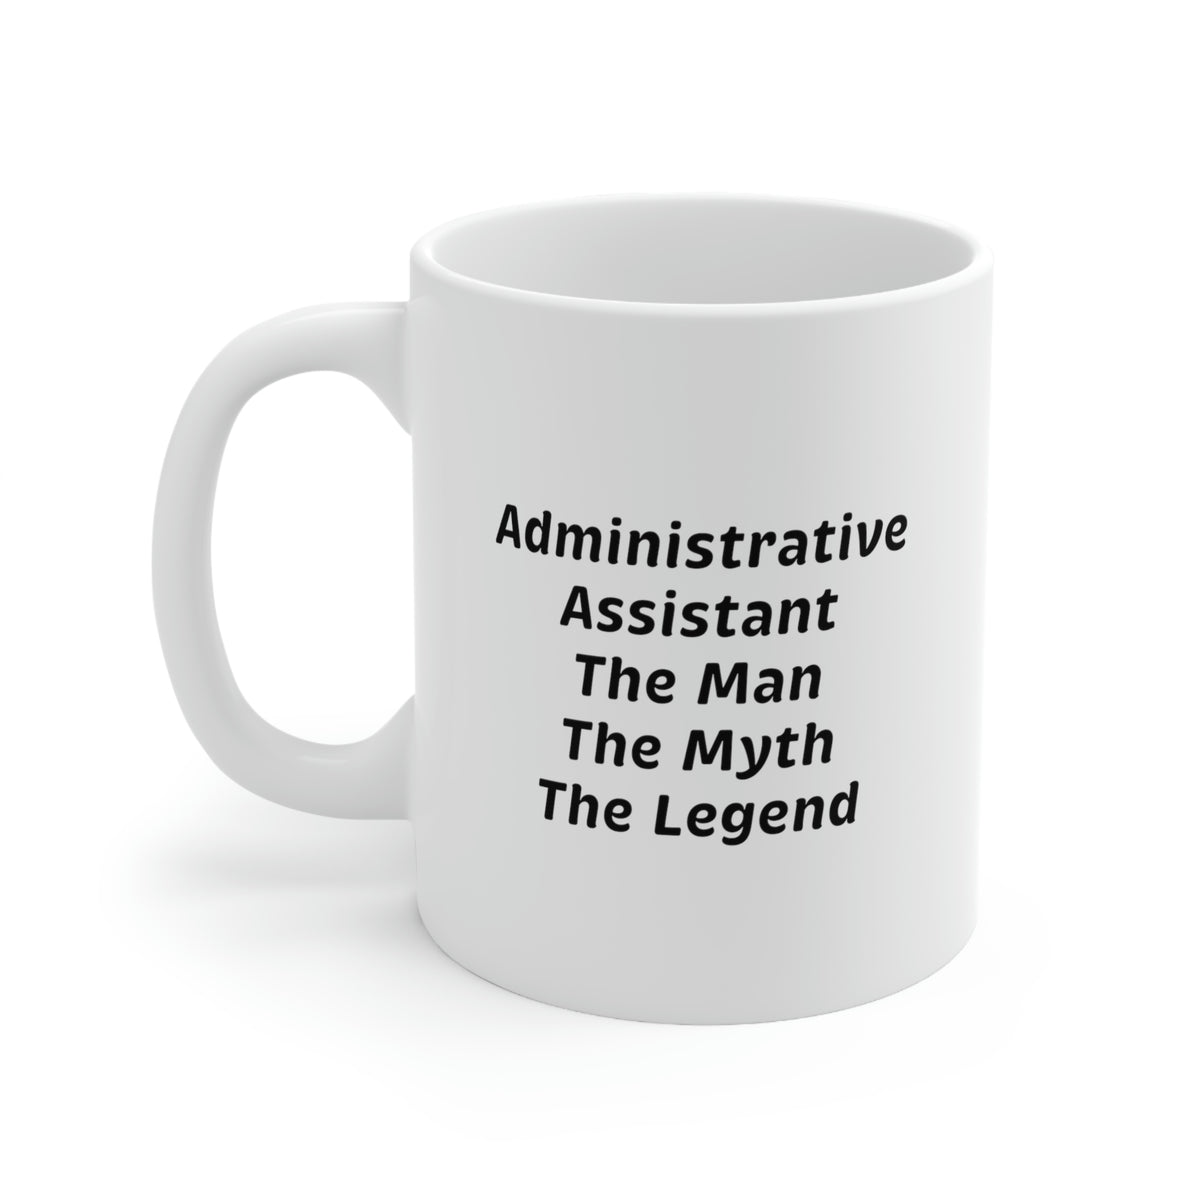 Administrative Assistant Coffee Mug - Administrative Assistant The Man The Myth The Legend - Unique Gag Gifts For Admin